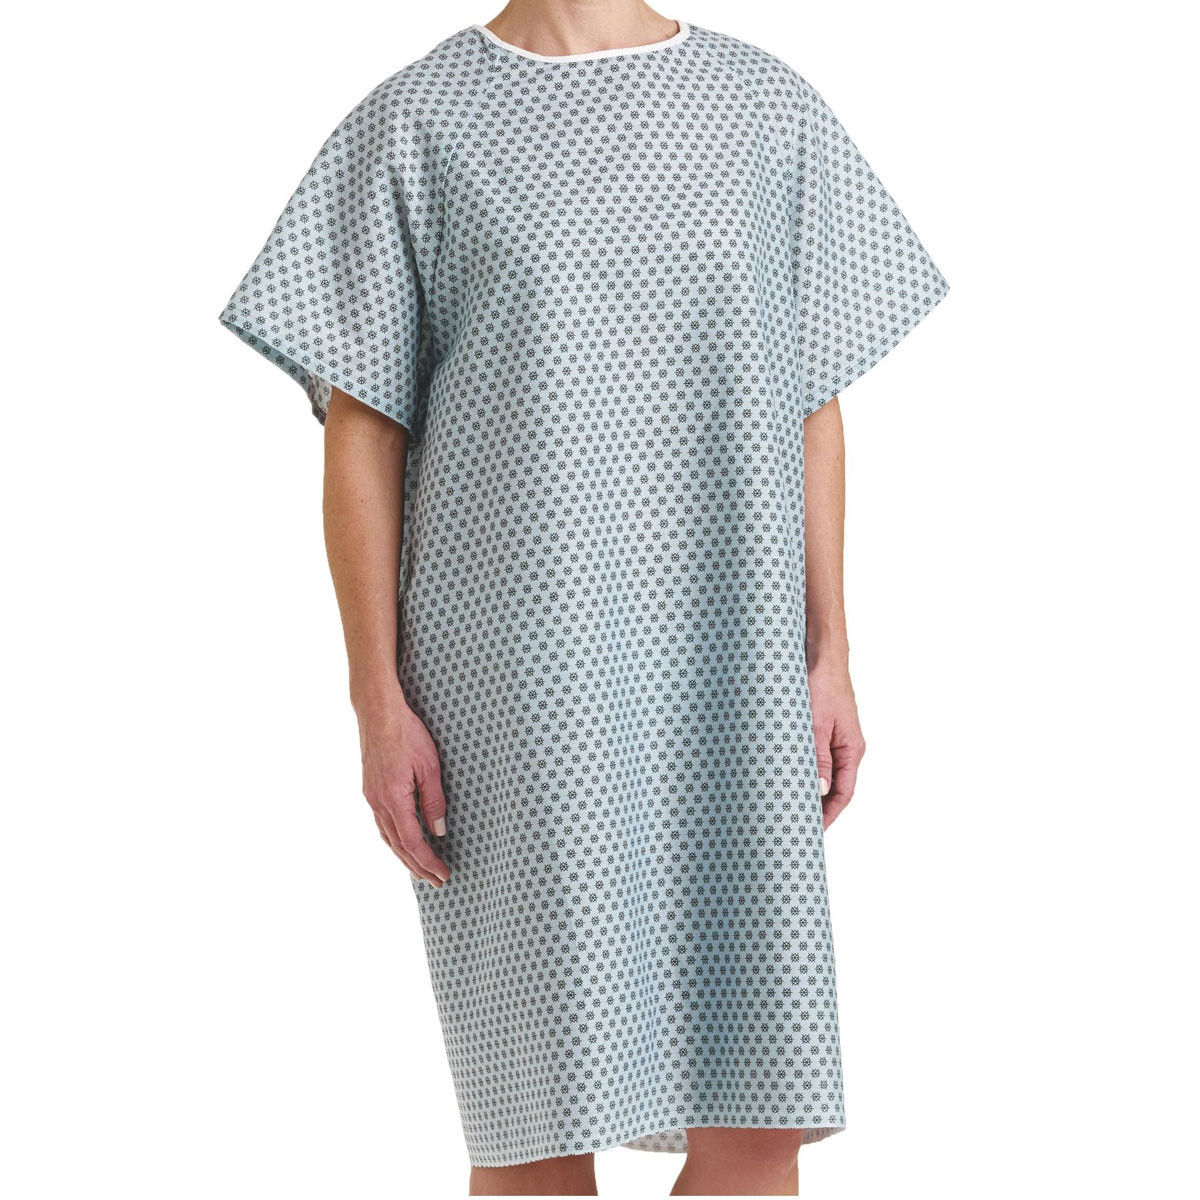 What is the origin of shipment for these hospital gowns?